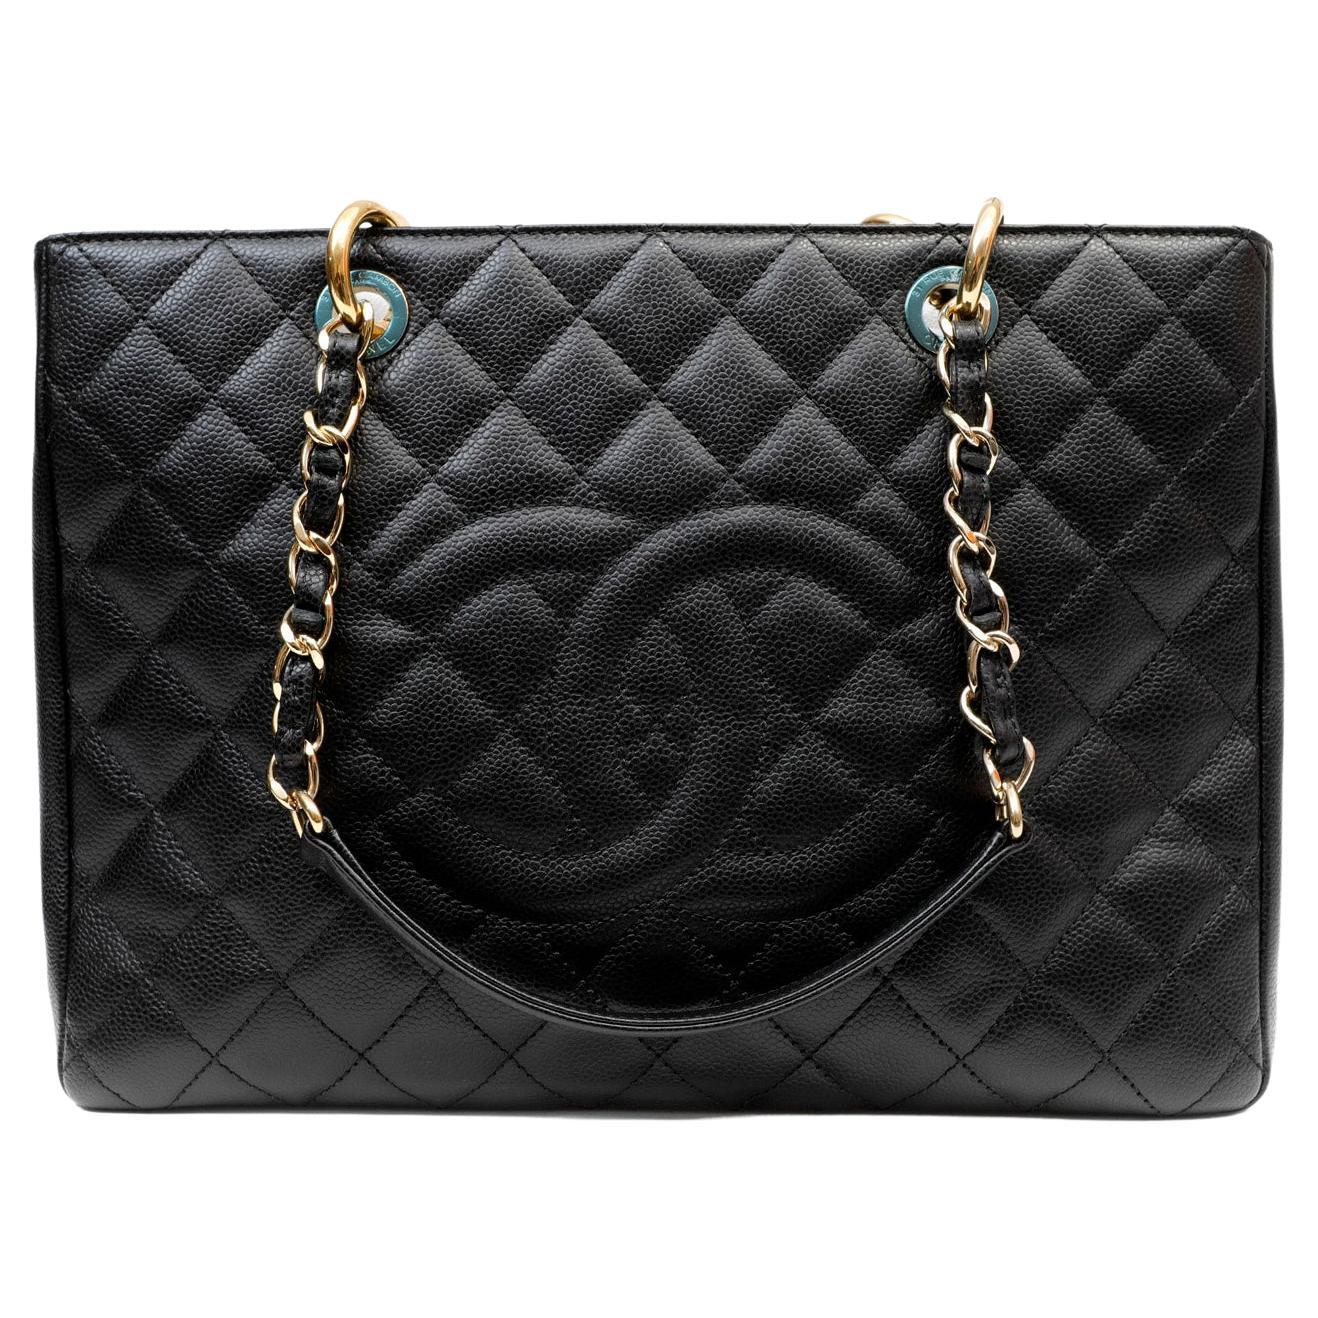 Chanel Black Caviar GST with Gold Hardware